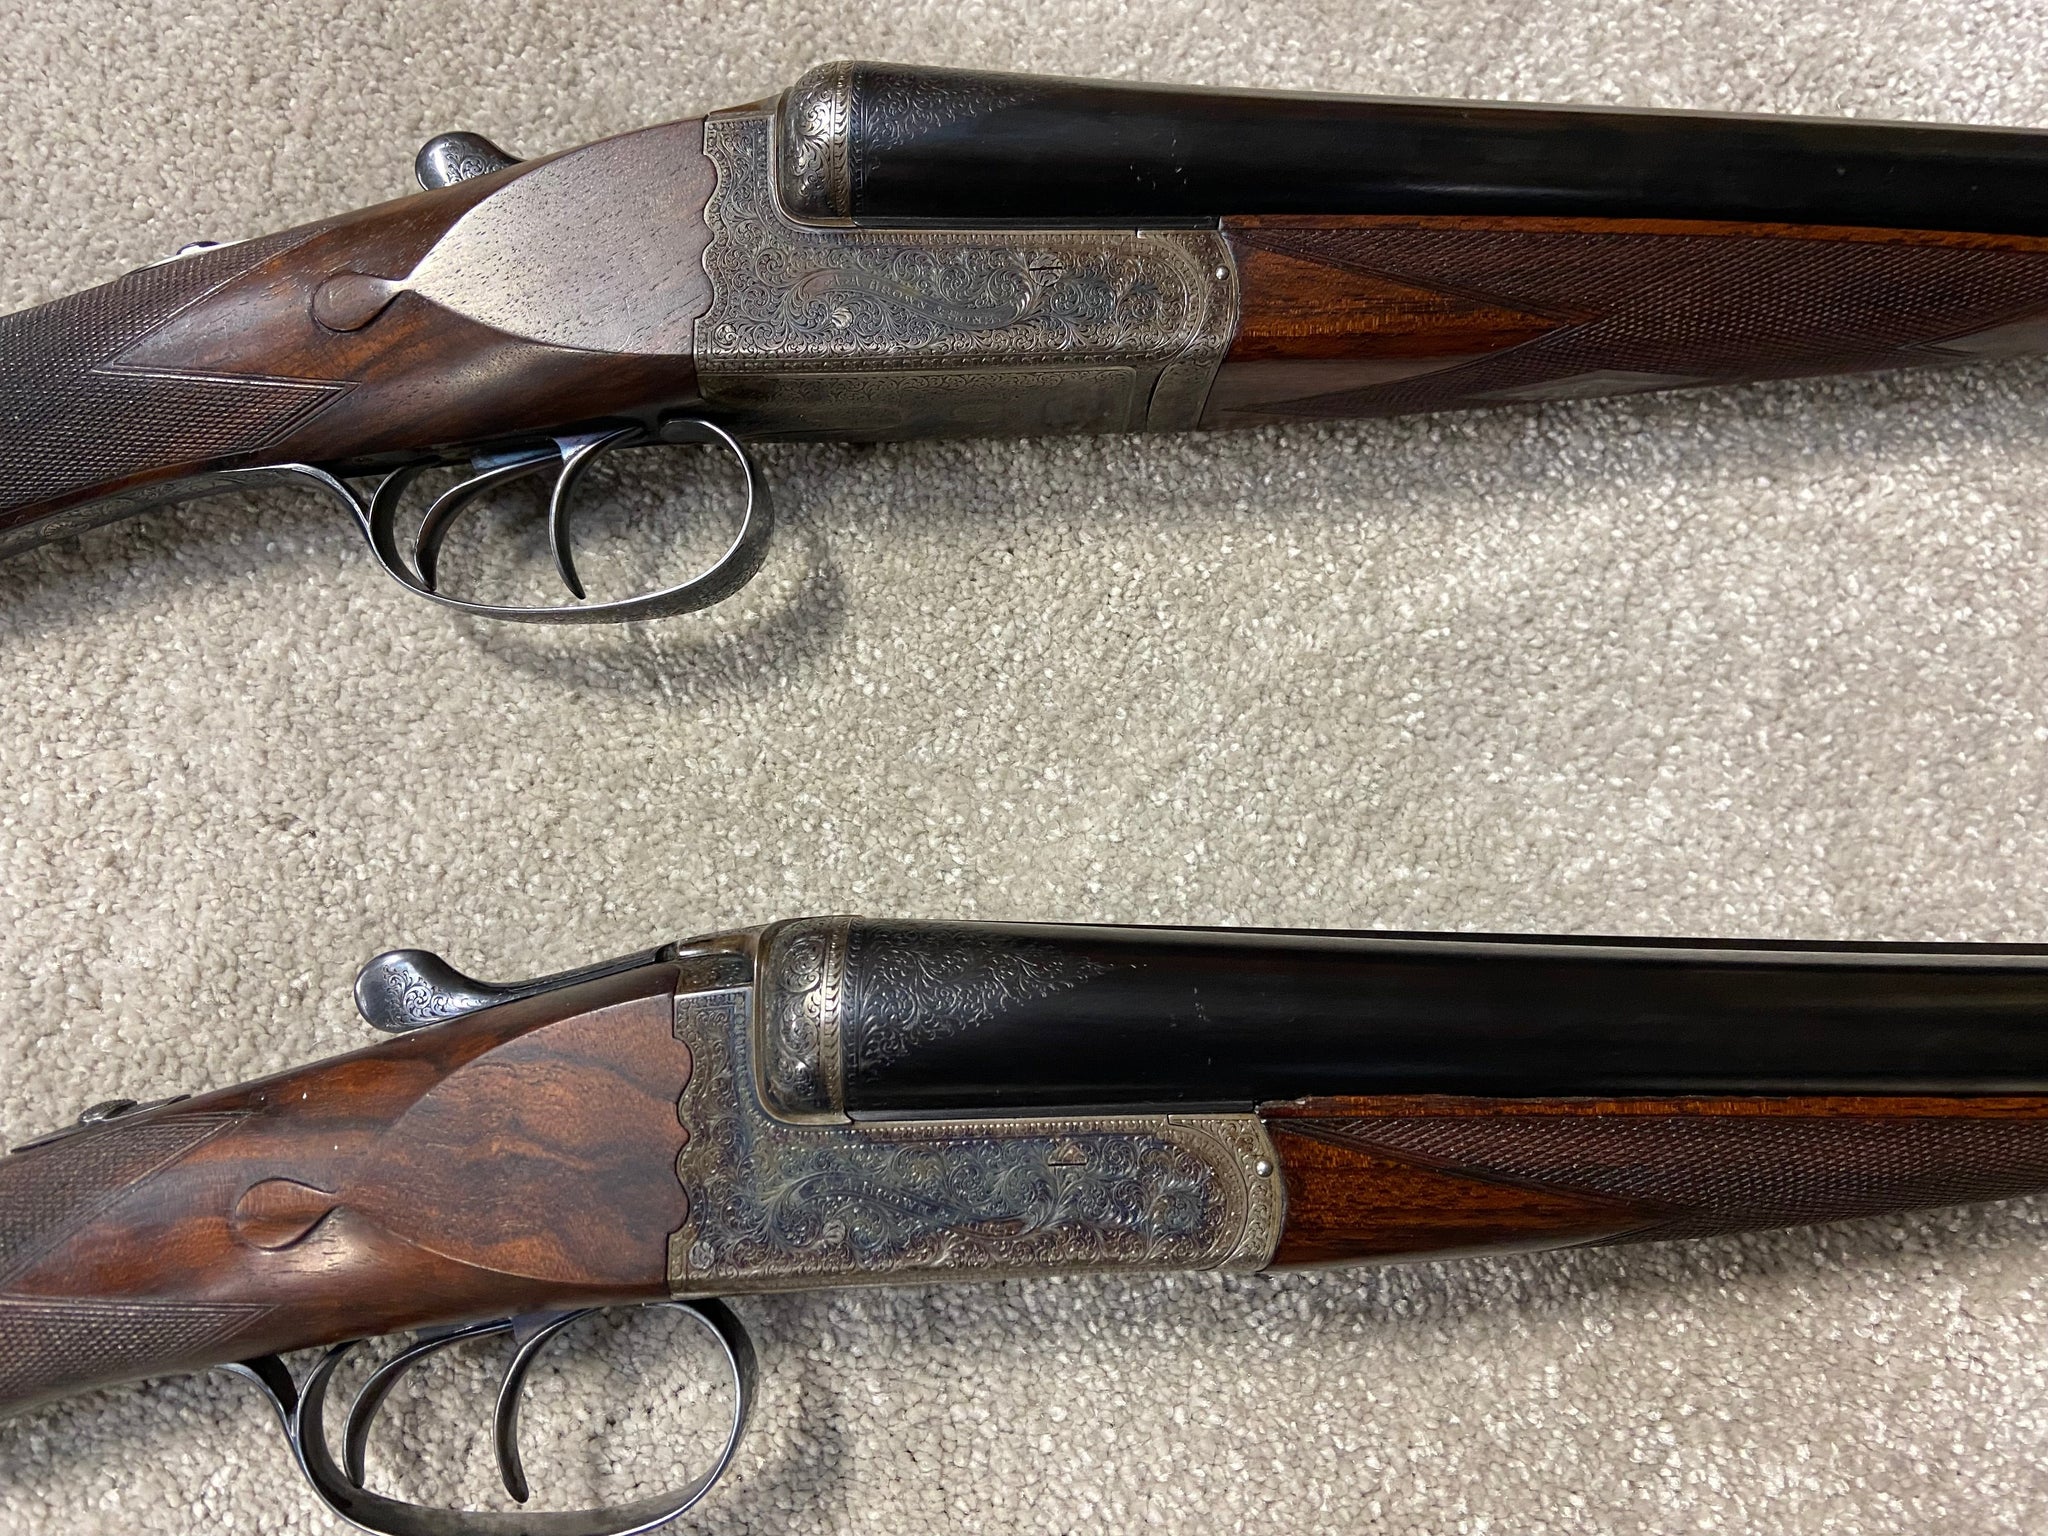 A Pair Of A A Brown Side By Side Shotguns